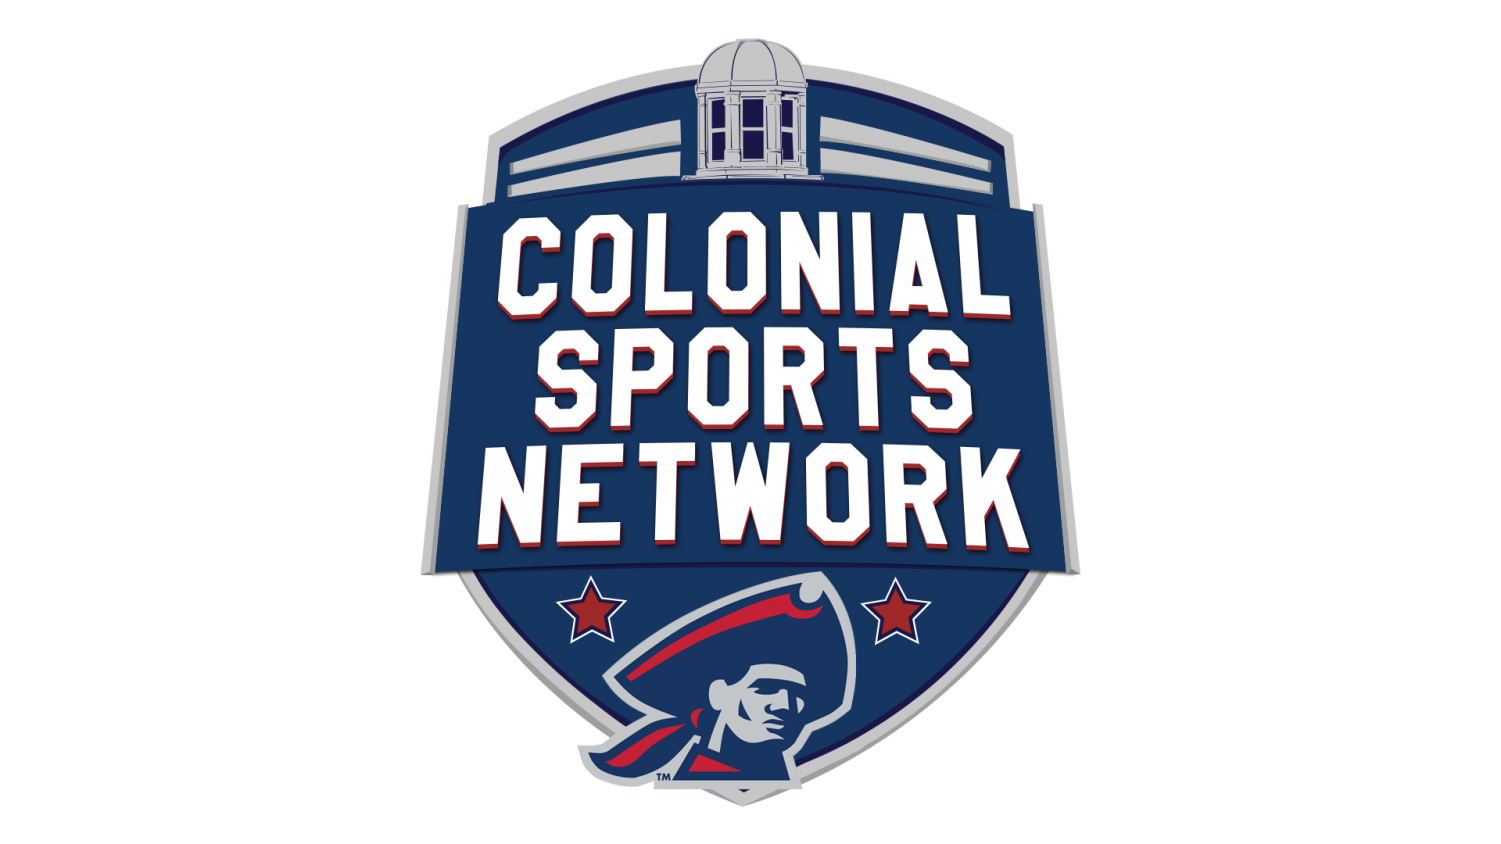 Colonial Sports Network